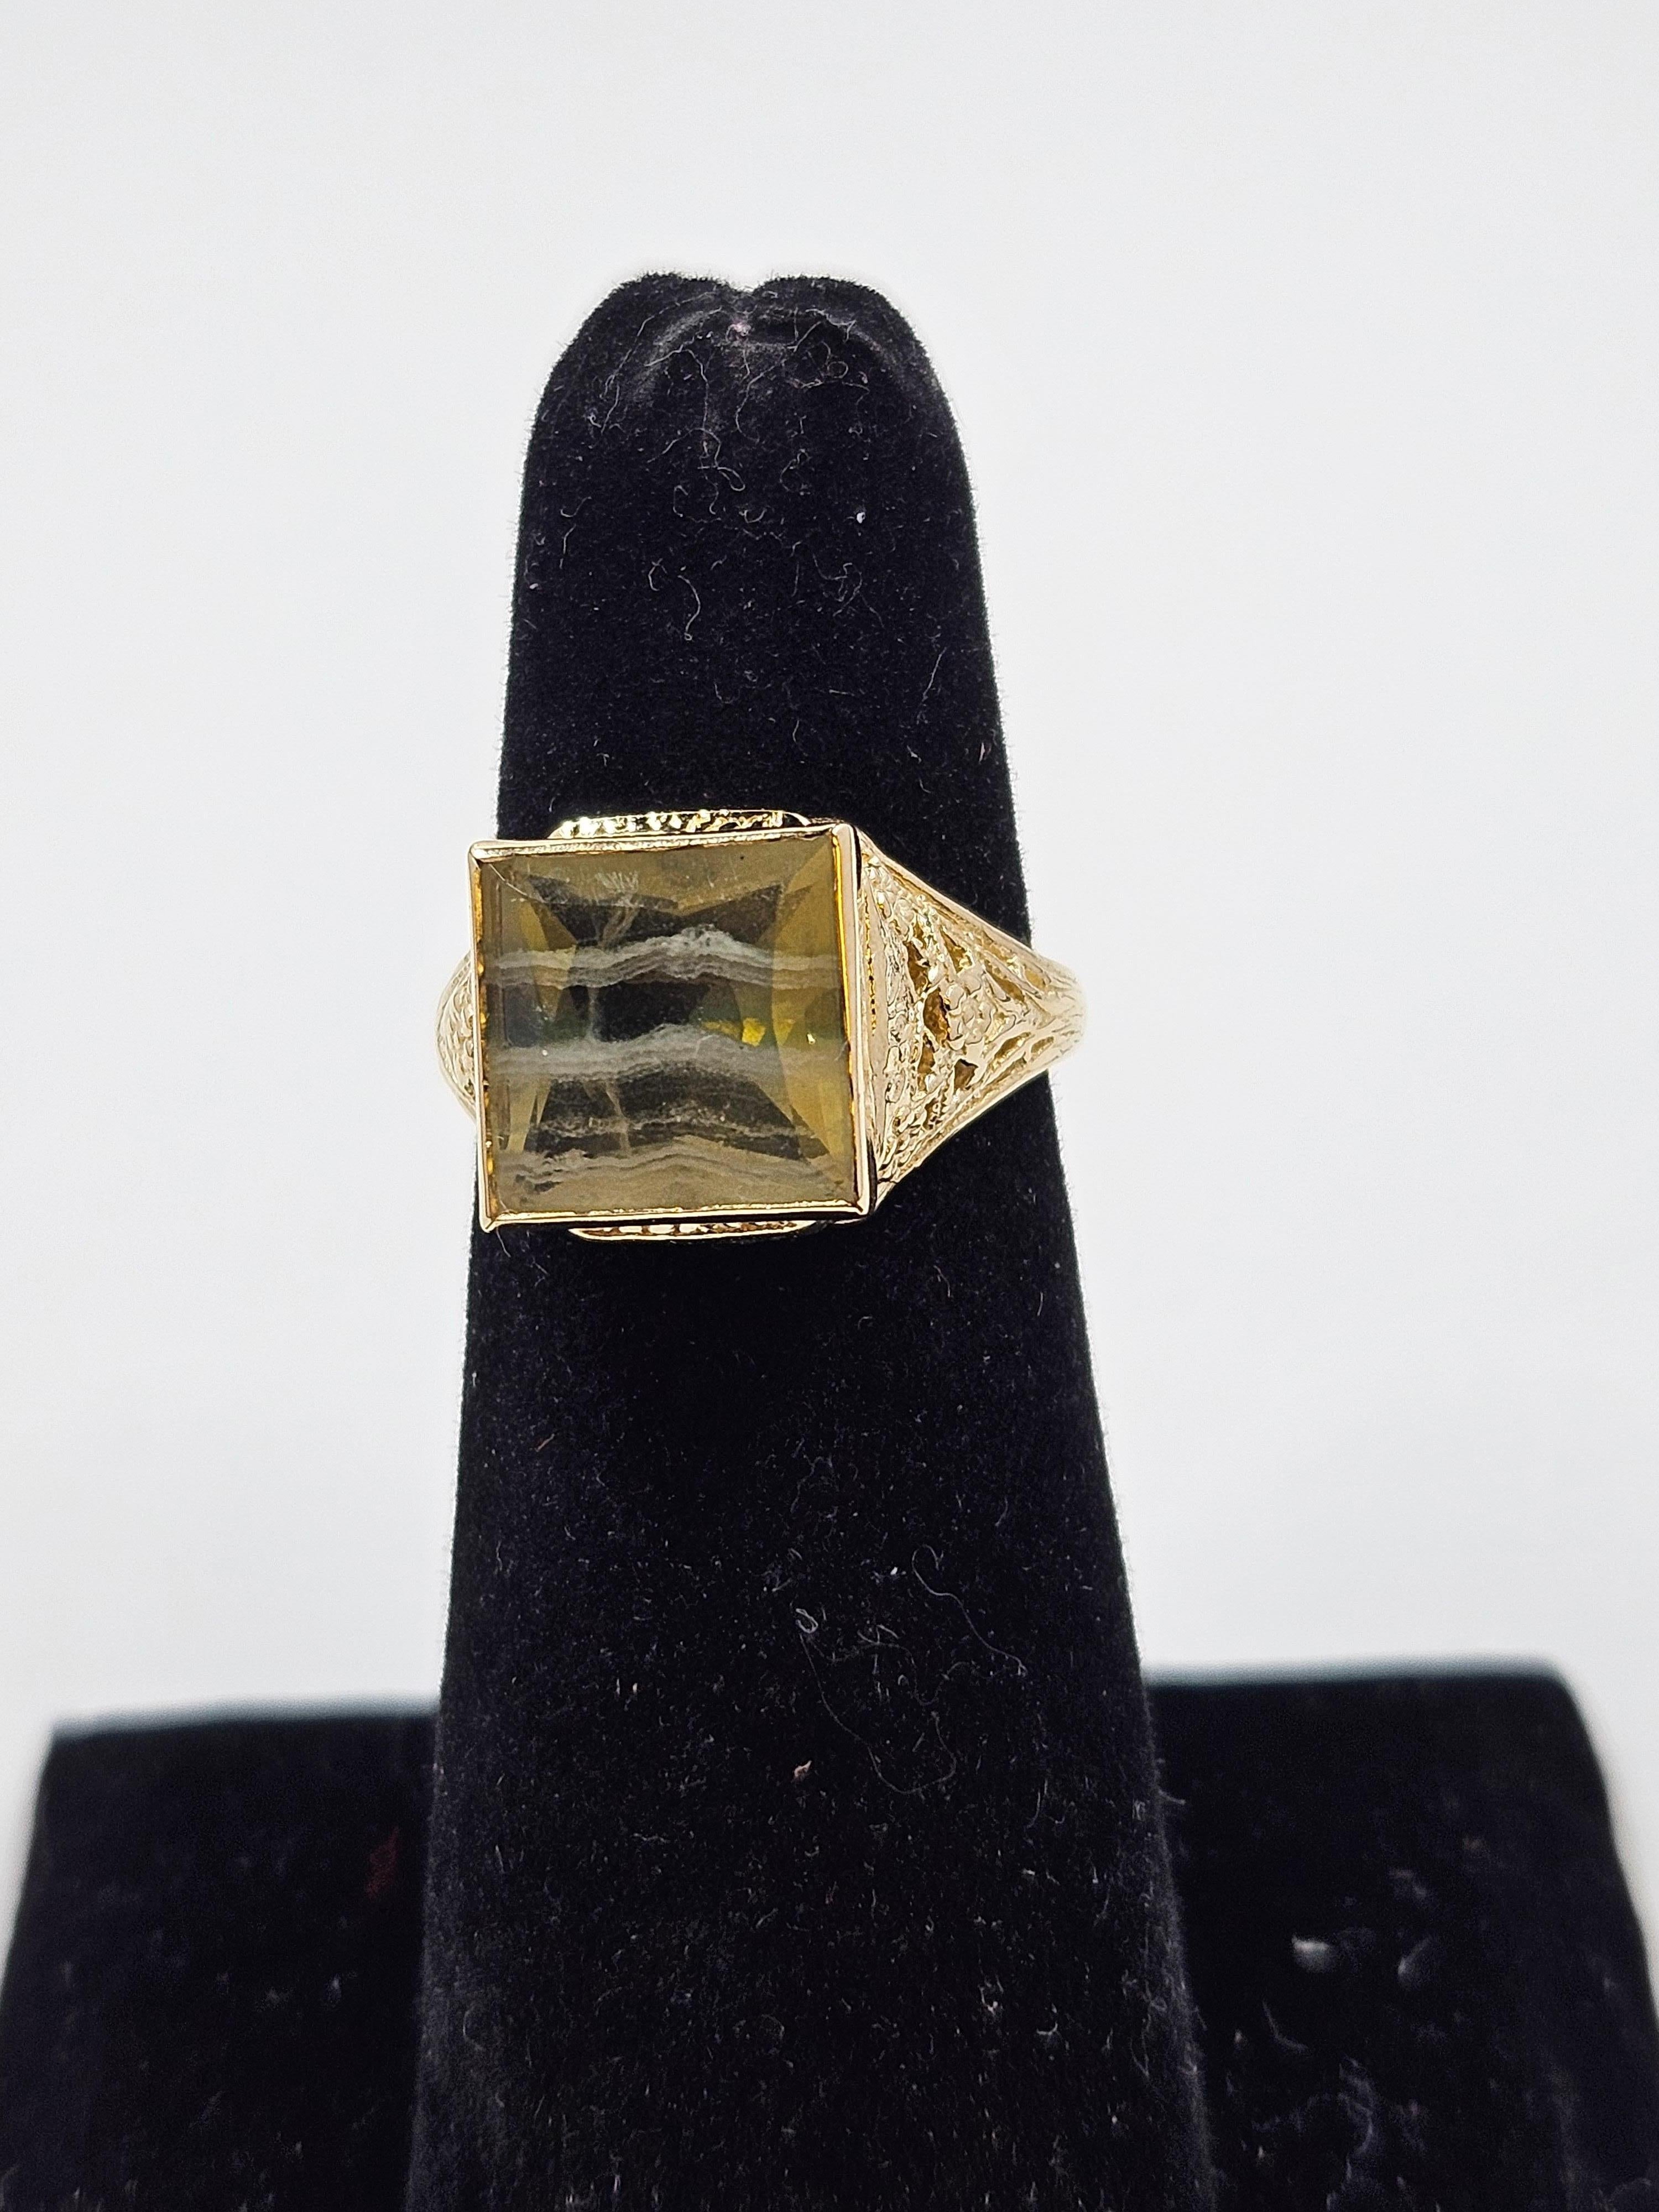 Vintage 14K yellow gold banded fluorite filigree ring. This beautiful filigree design 14K yellow gold ring features an 11mm square cut banded fluorite stone. Ring is a size 7.